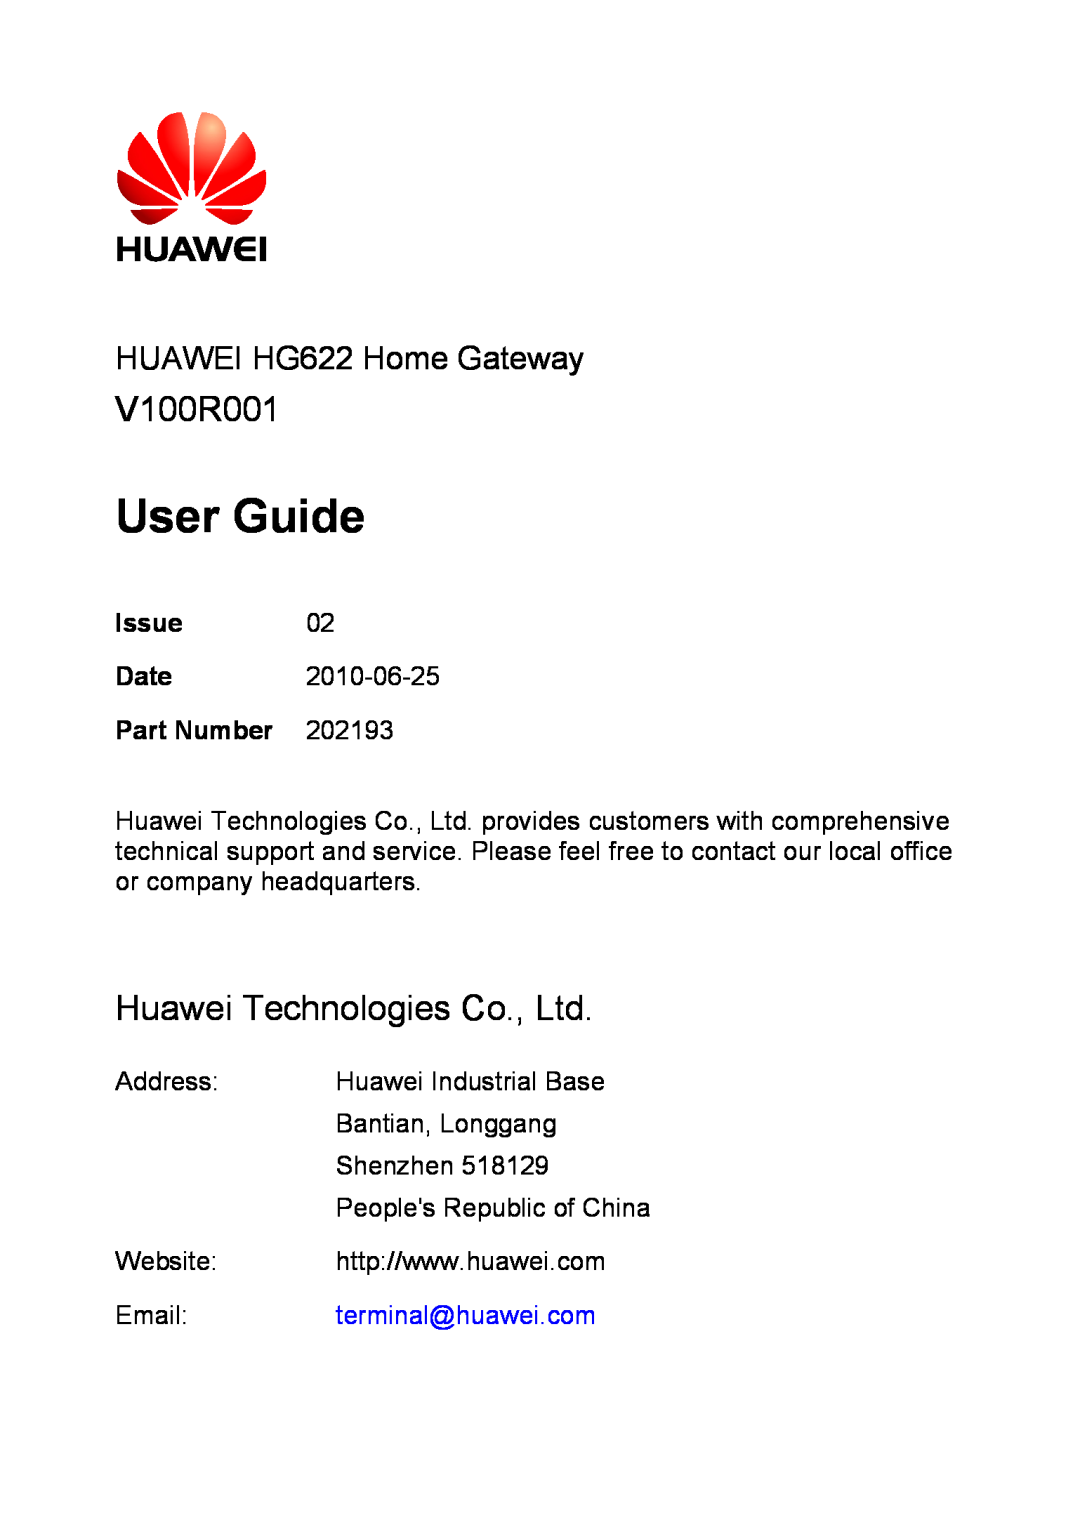 Huawei manual V100R001, HUAWEI HG622 Home Gateway, User Guide, Issue, Date, Part Number, Address, Huawei Industrial Base 